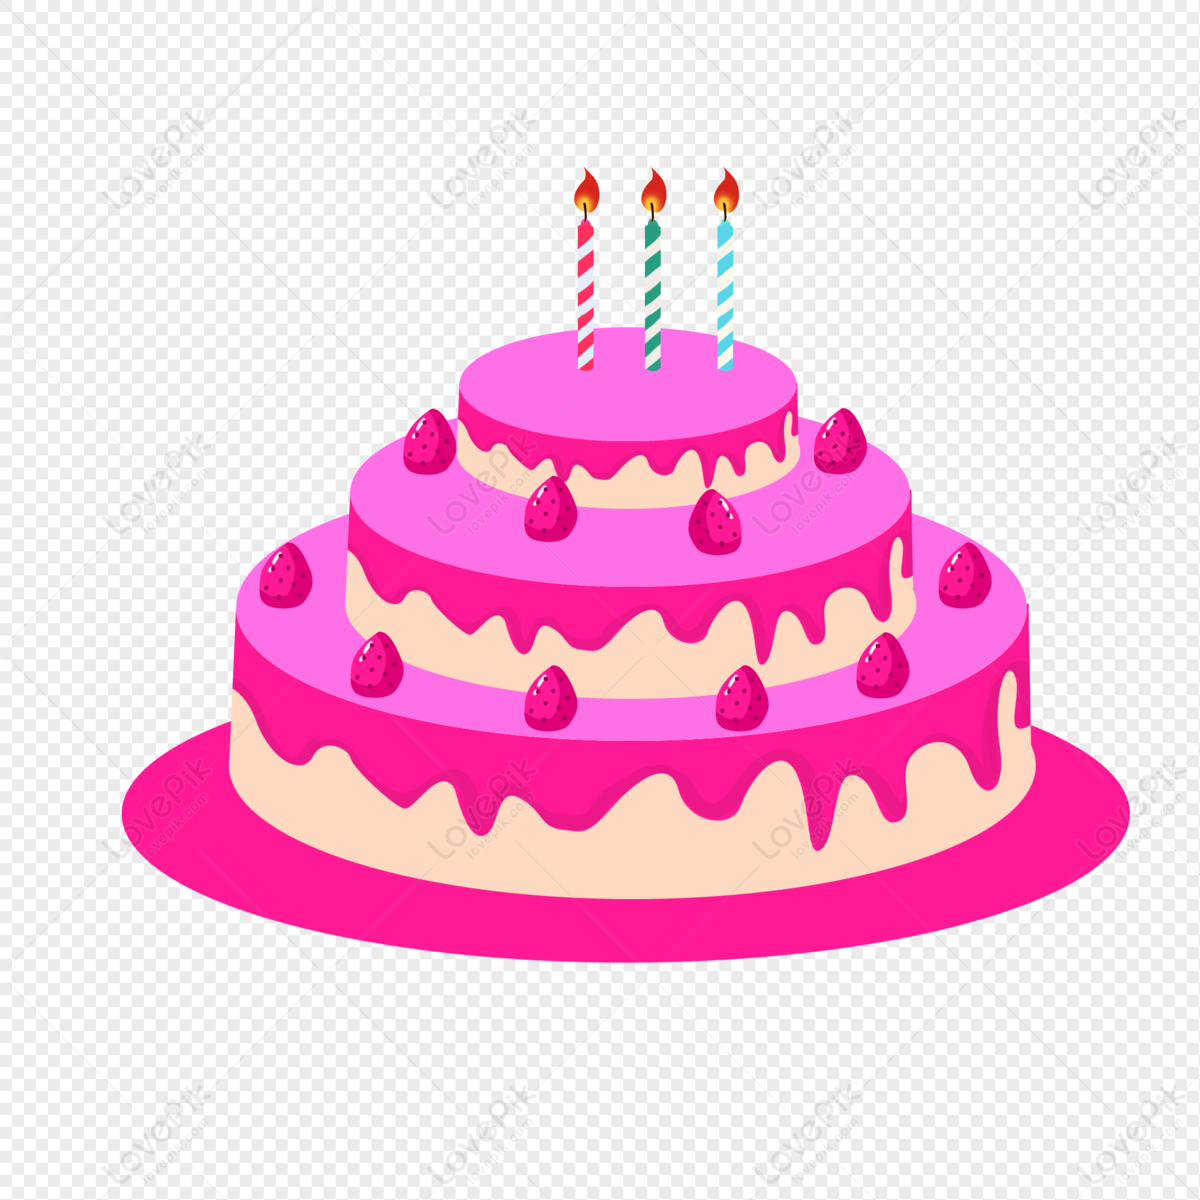 Cake PNG image transparent image download, size: 3312x2133px